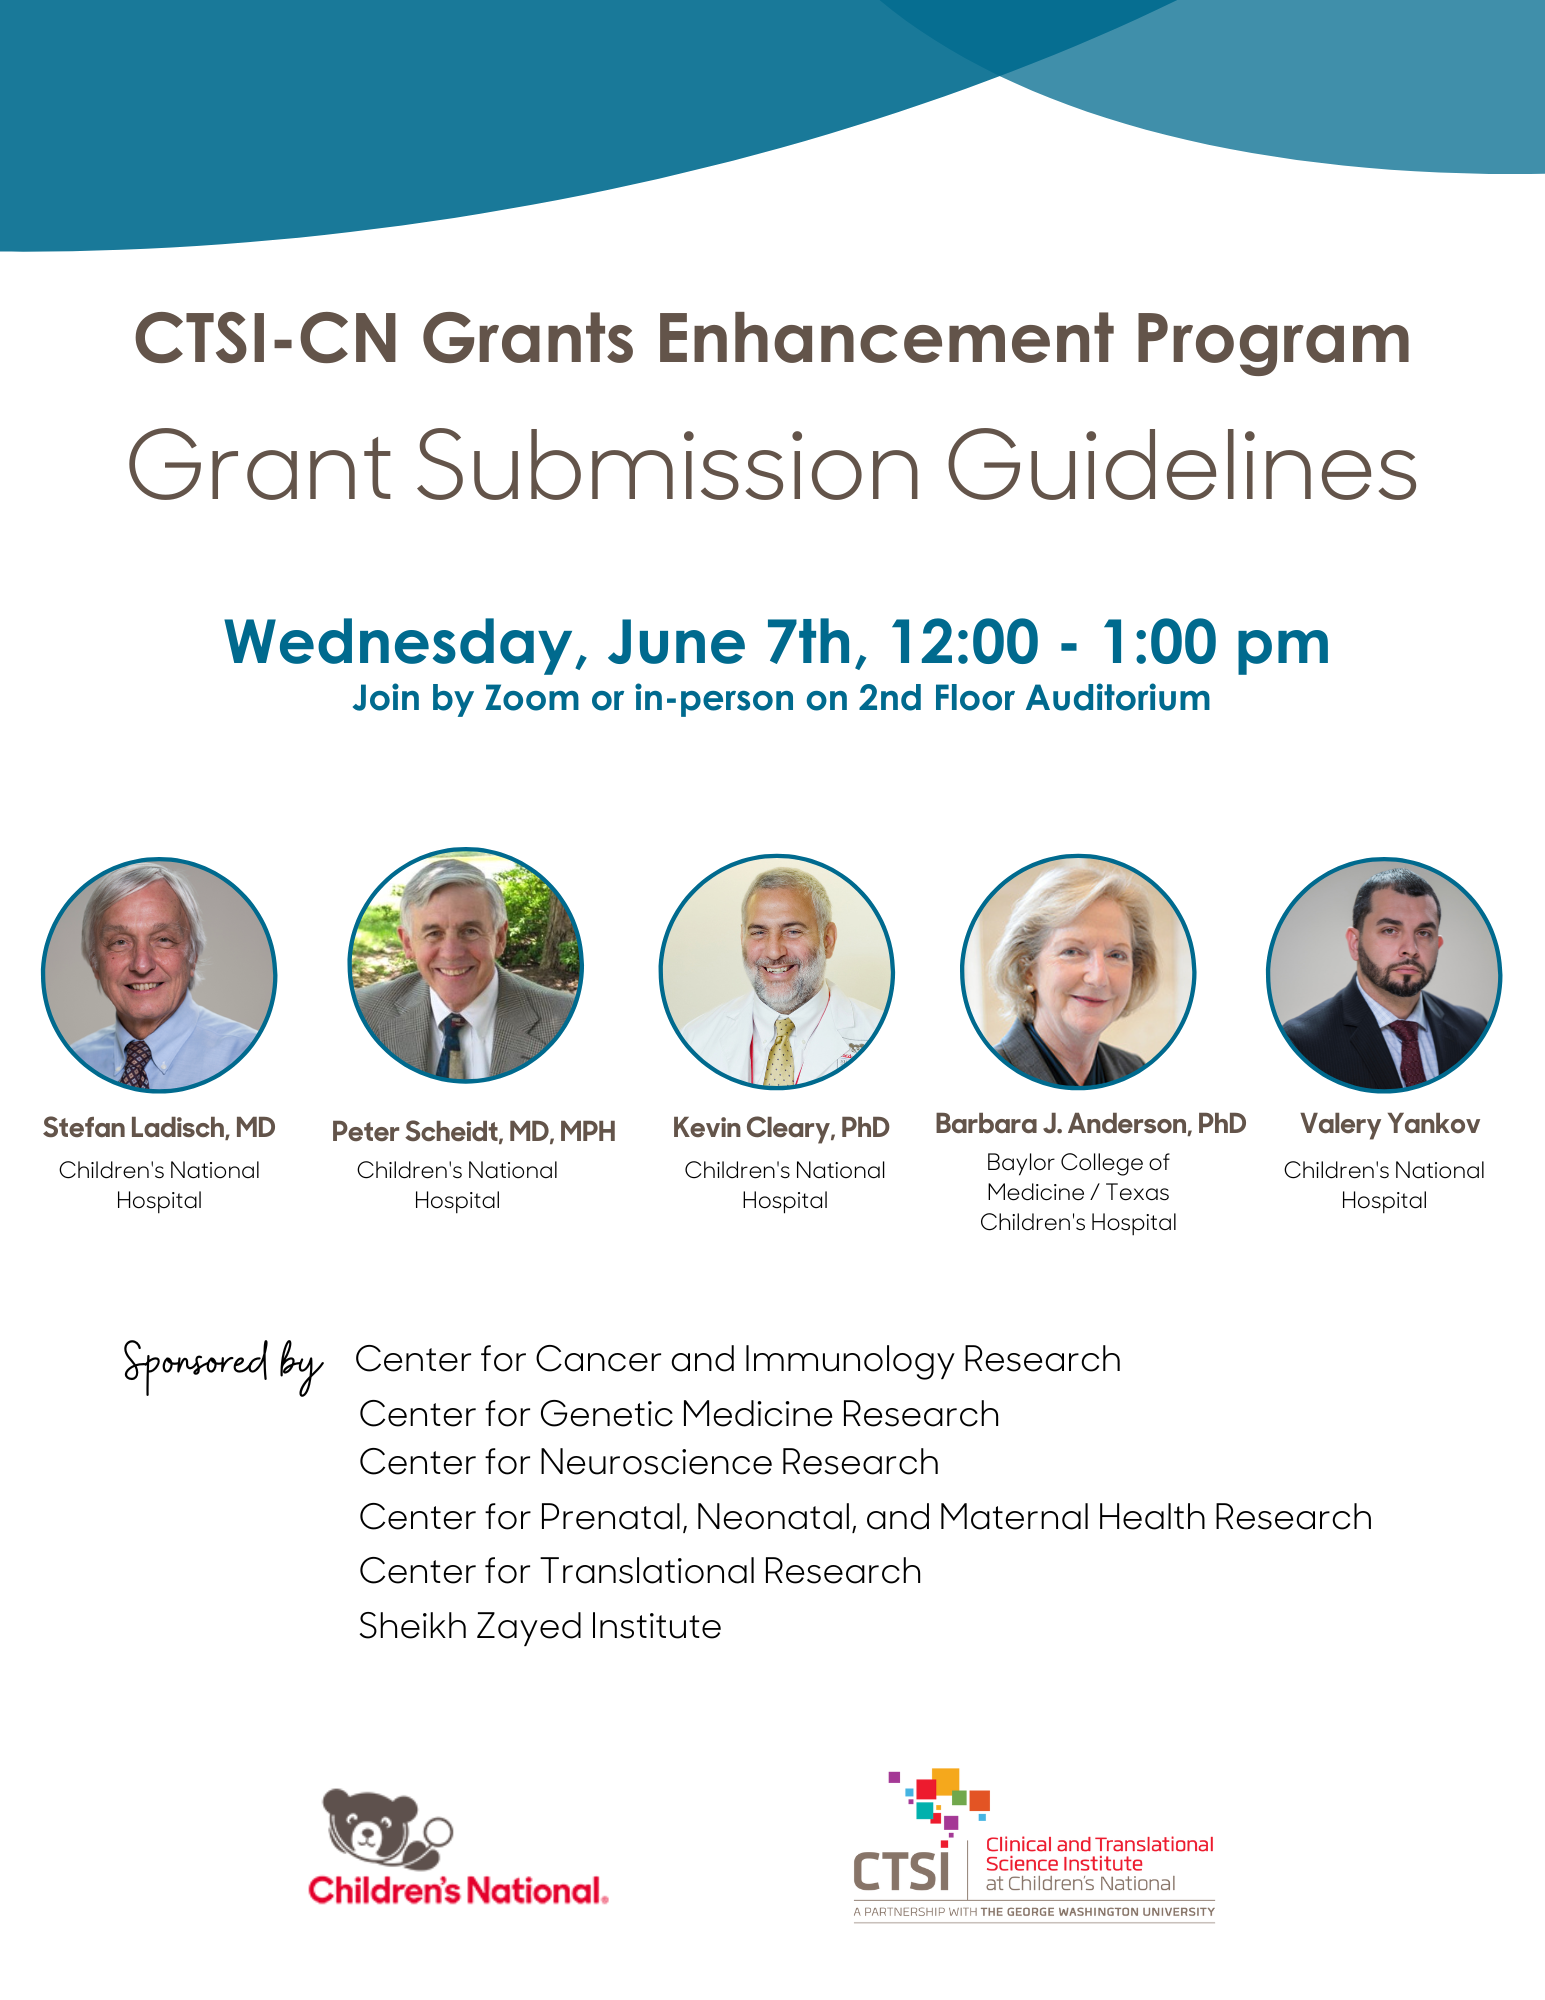 CTSI-CN GEP: Grant Submission Guidelines Webinar